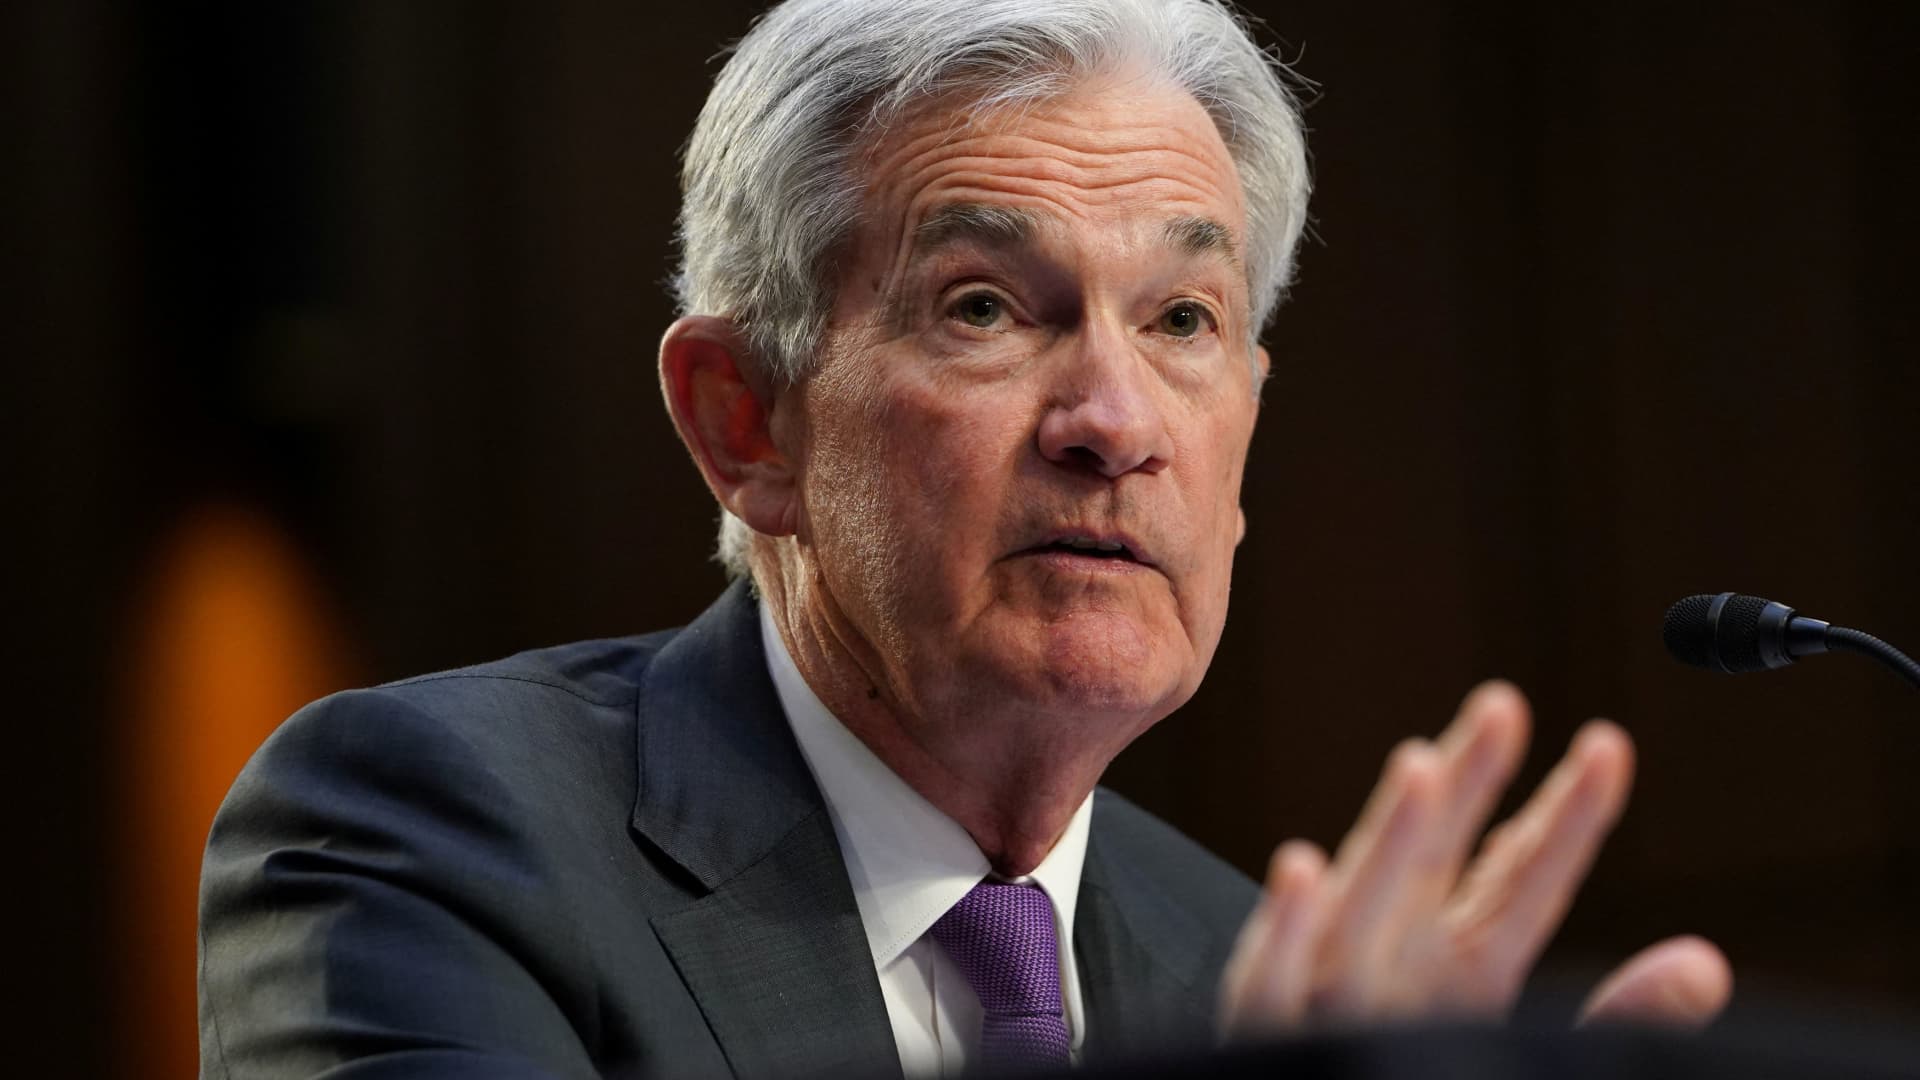 No exit ramp for Fed’s Powell until he creates a recession, economist says